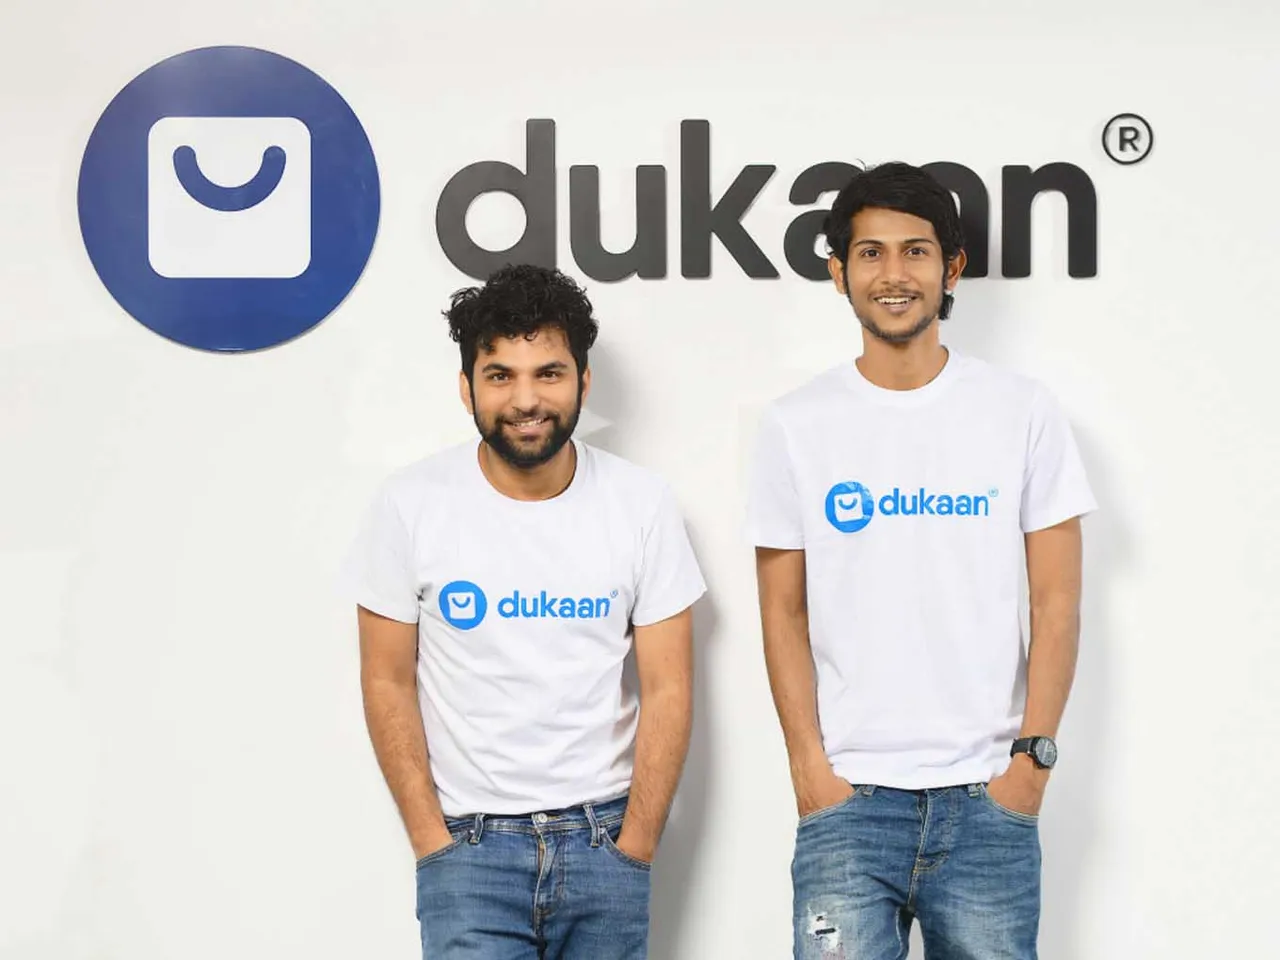 Online retail platform Dukaan raises $11M in funding led by 640 Oxford Ventures, others